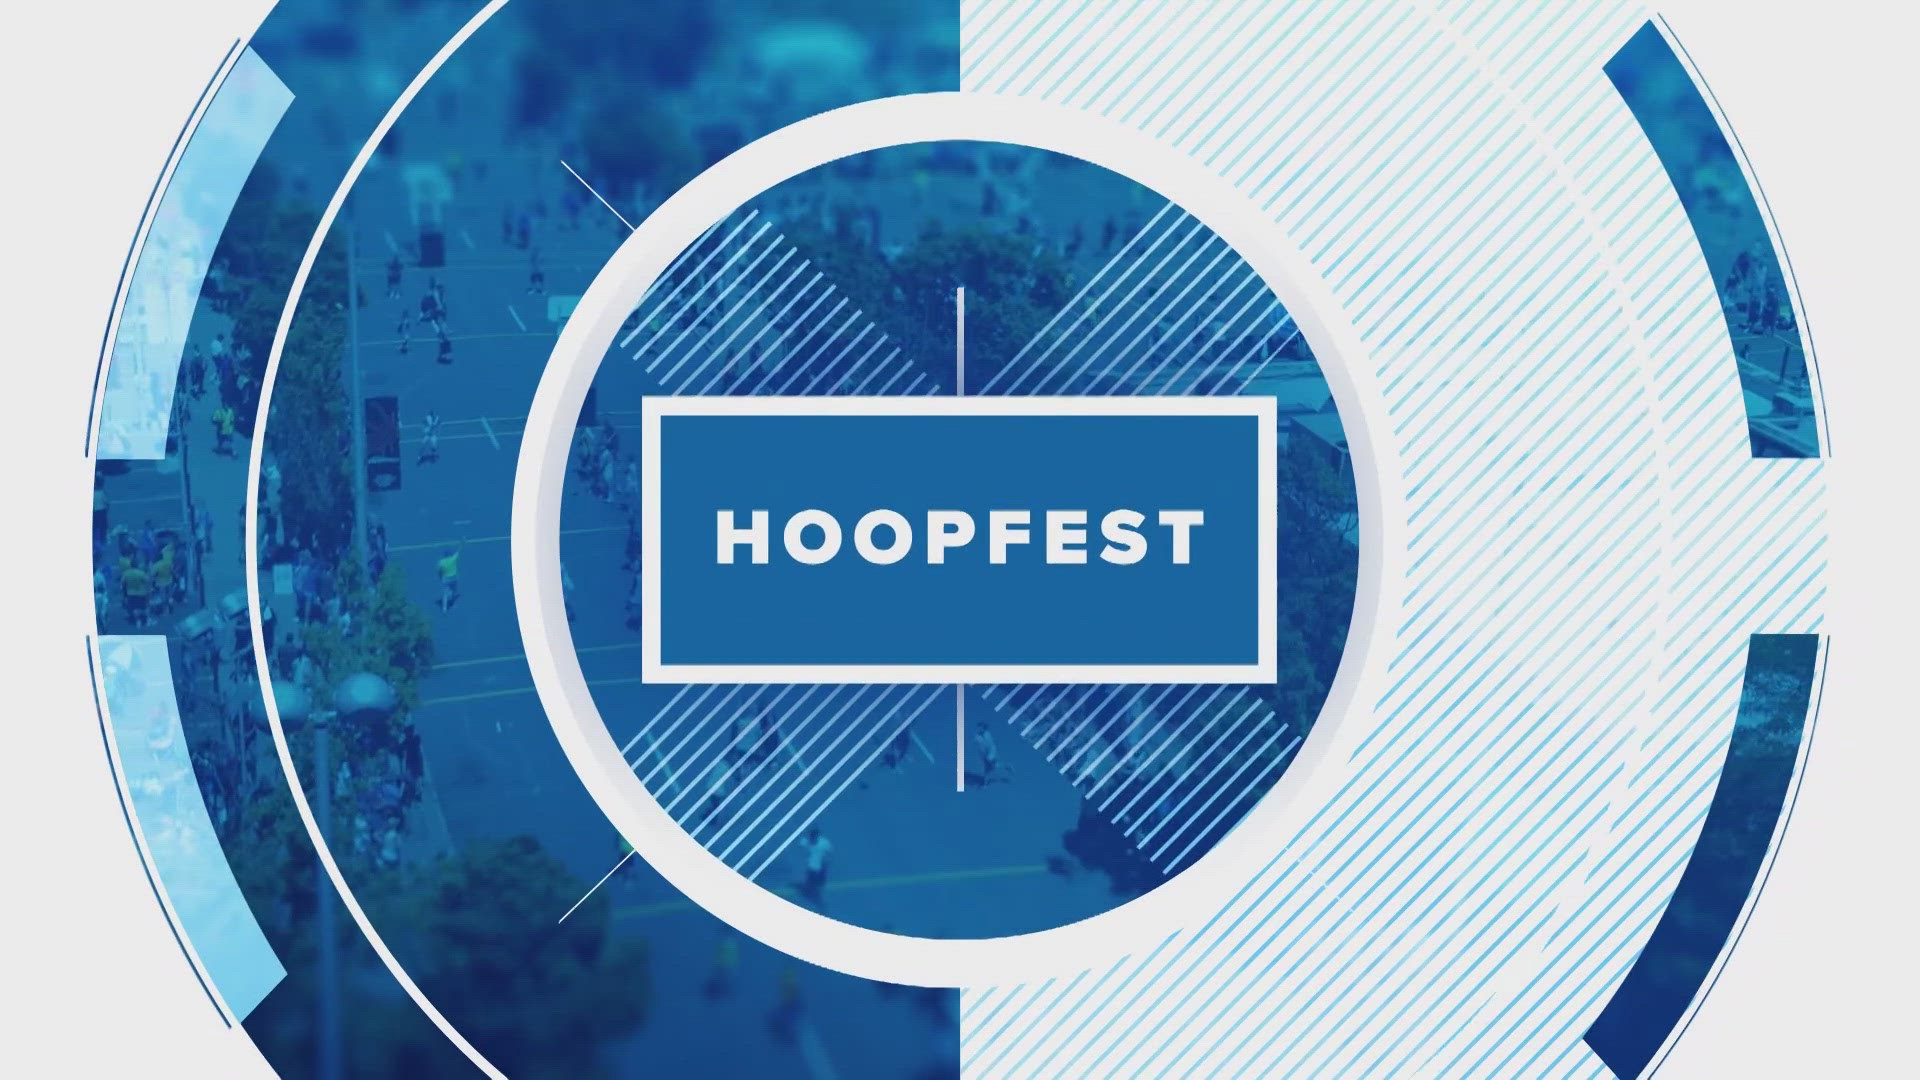 Here is a sports recap about what's been happening at Hoopfest.